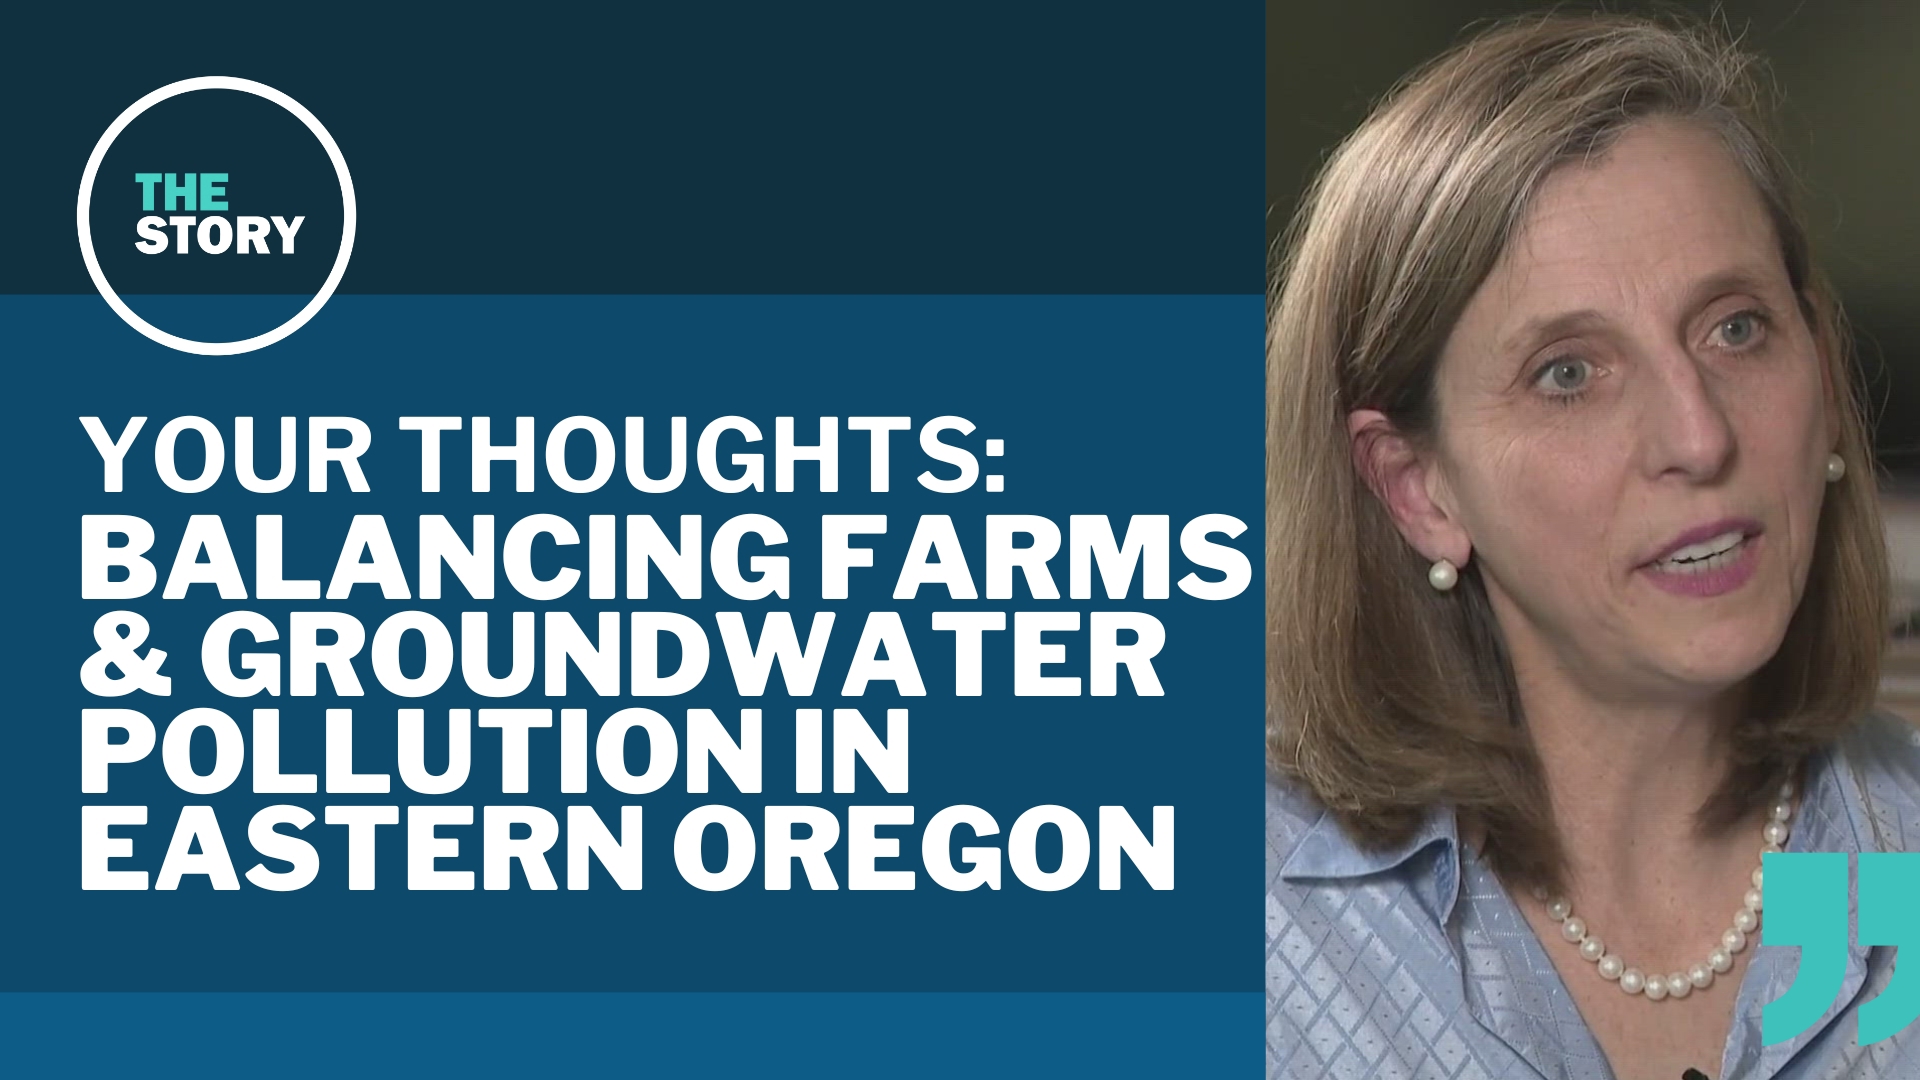 Yesterday, we brought you our interview with Lisa Charpilloz Hanson, head of the agency that can regulate farms in the Lower Umatilla Basin. Here's what you thought.